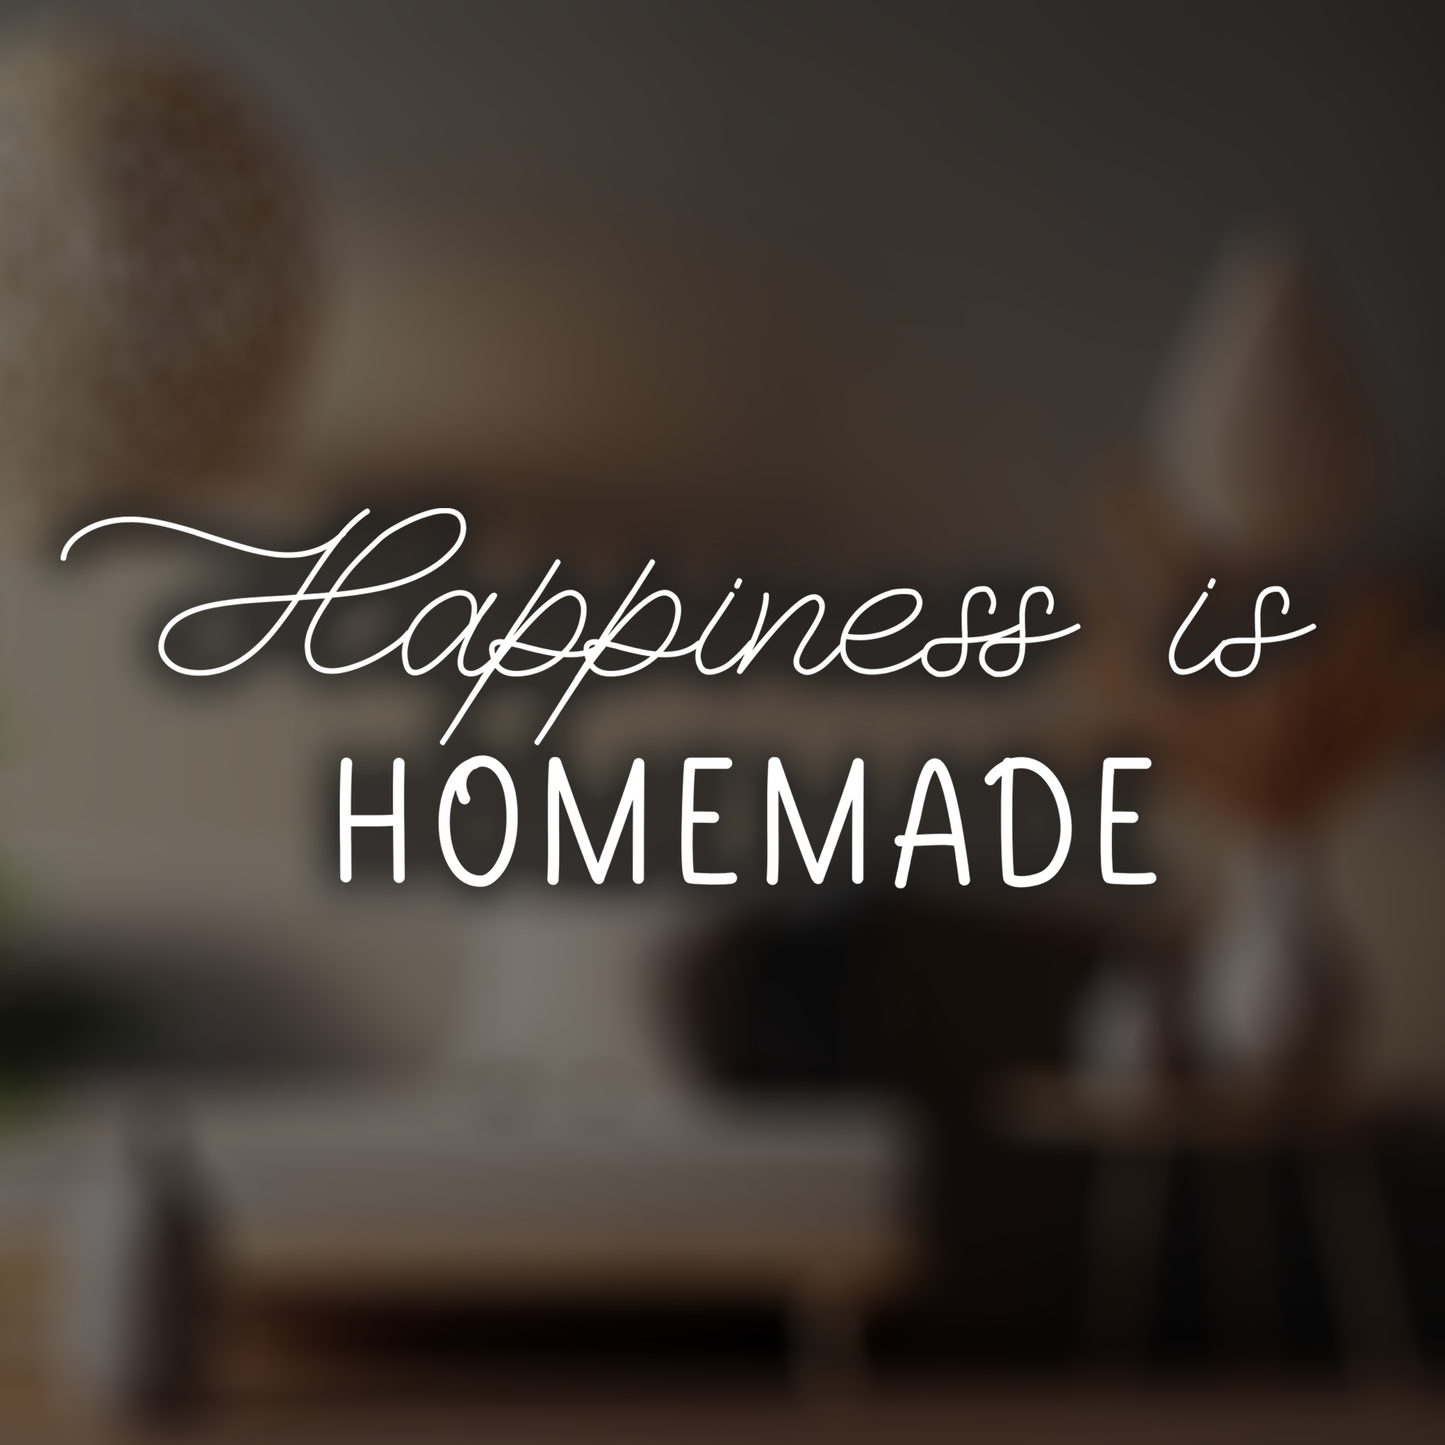 Homemade Happiness Wall Sticker Decal